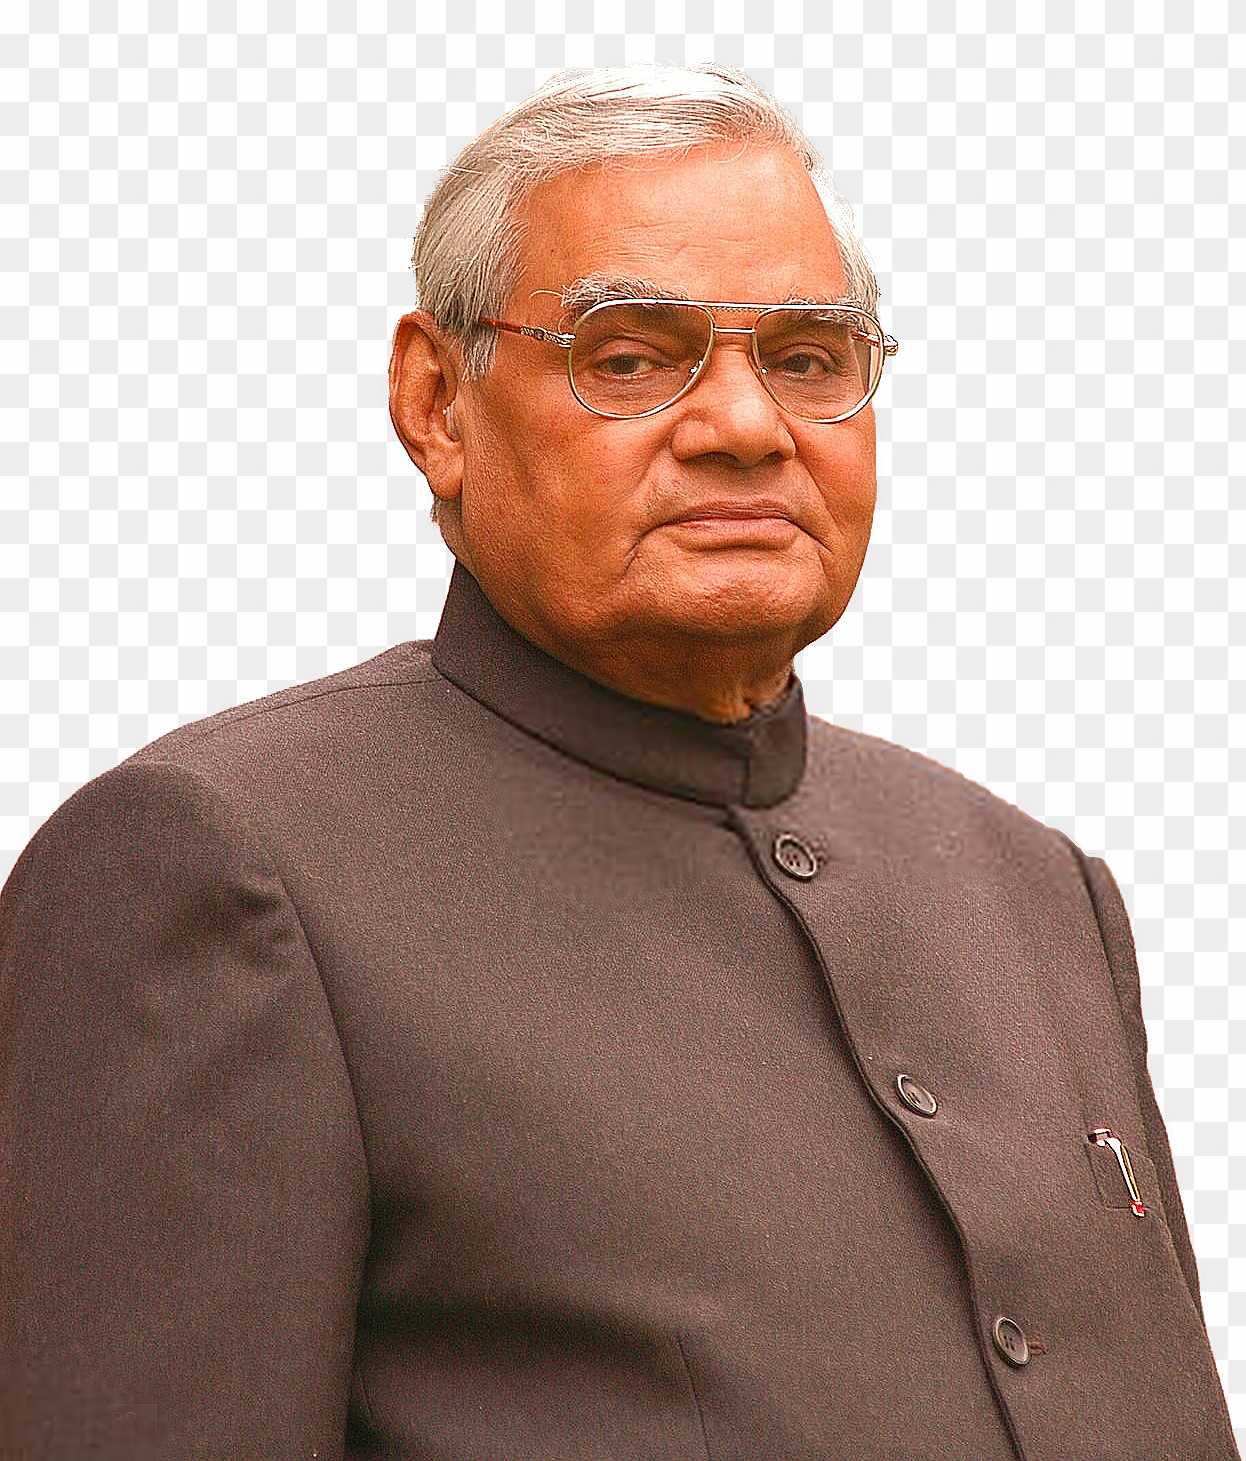 President unveils Atal Bihari Vajpayee's portrait in Parliament's Central  Hall - The Economic Times